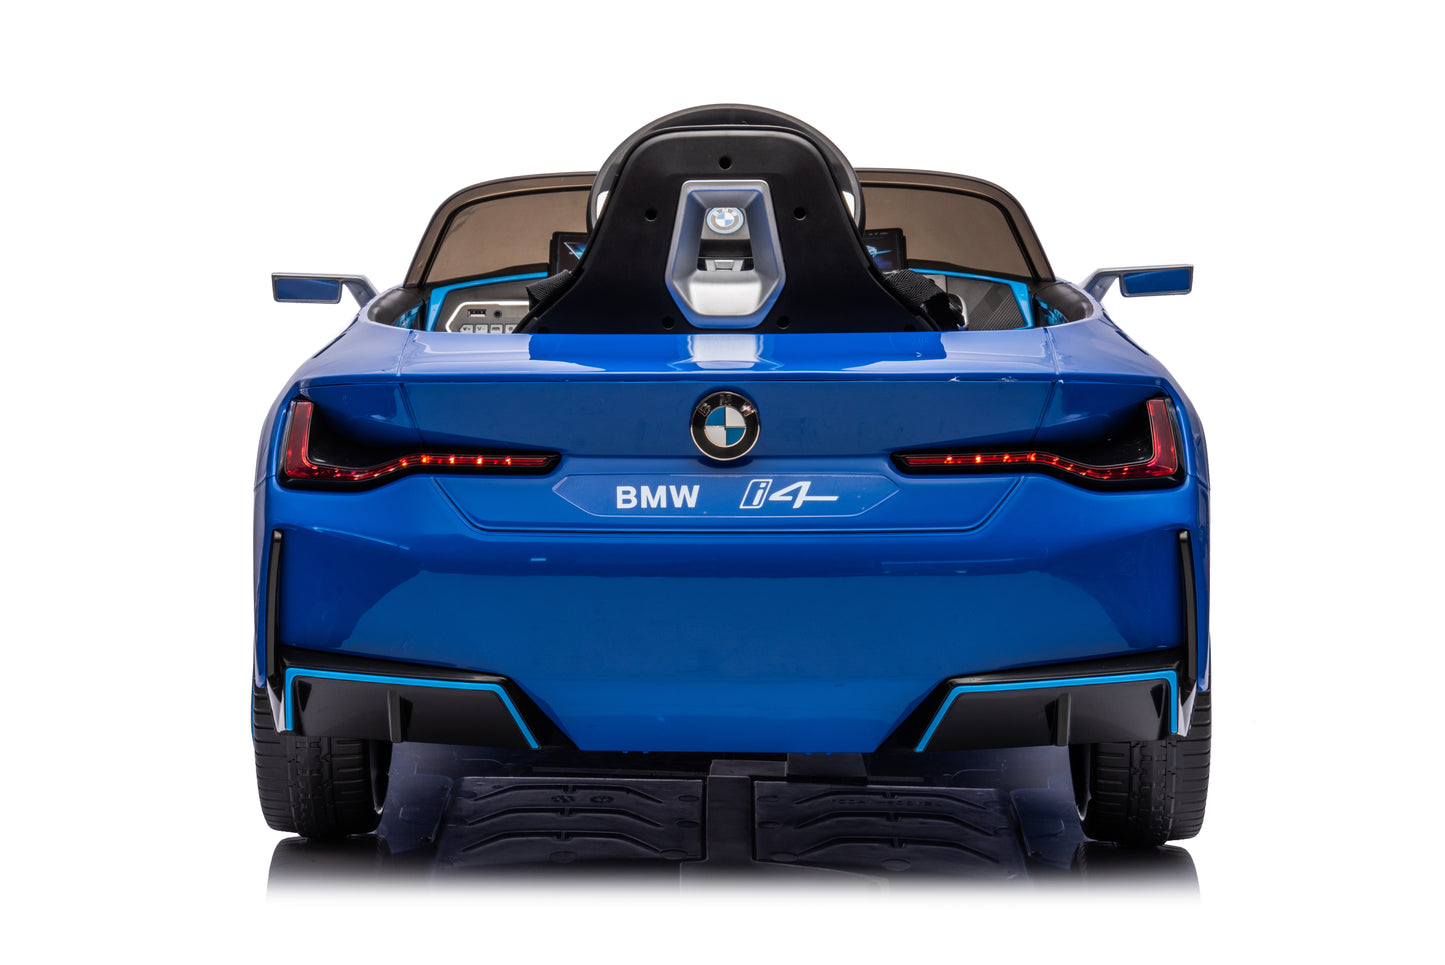 Licensed BMW i4 Electric 12V Kids Ride on Toy Car With Remote - Metallic Blue